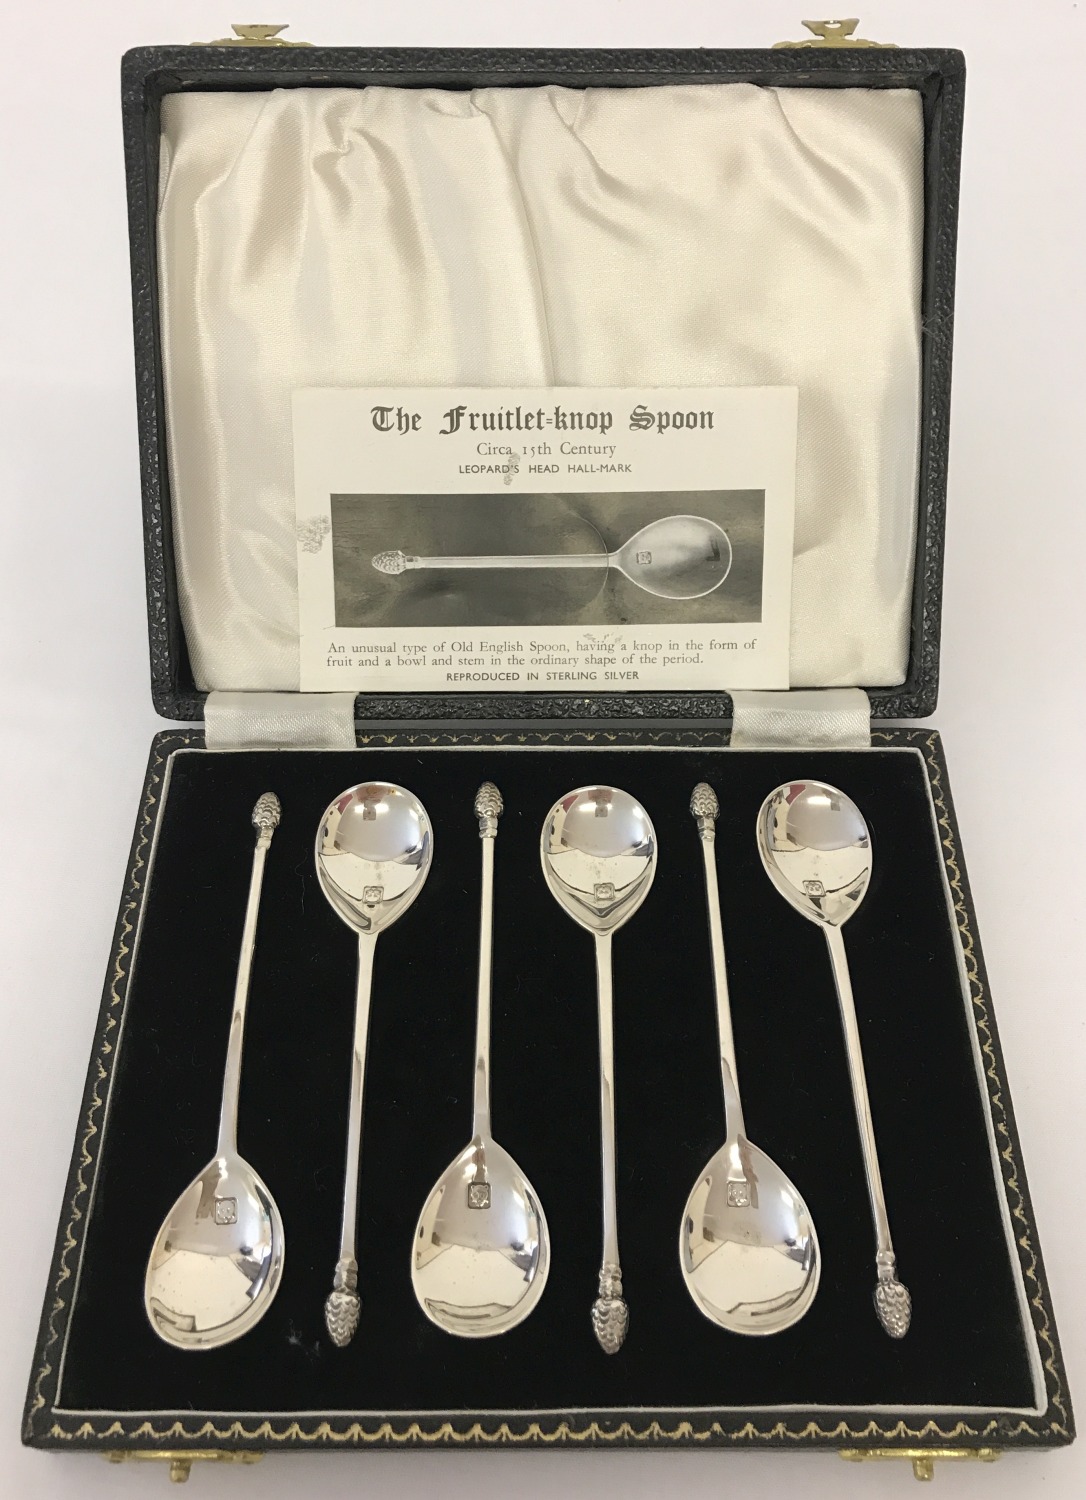 A case set of 6 silver "The Fruitlet-Knop" spoons.